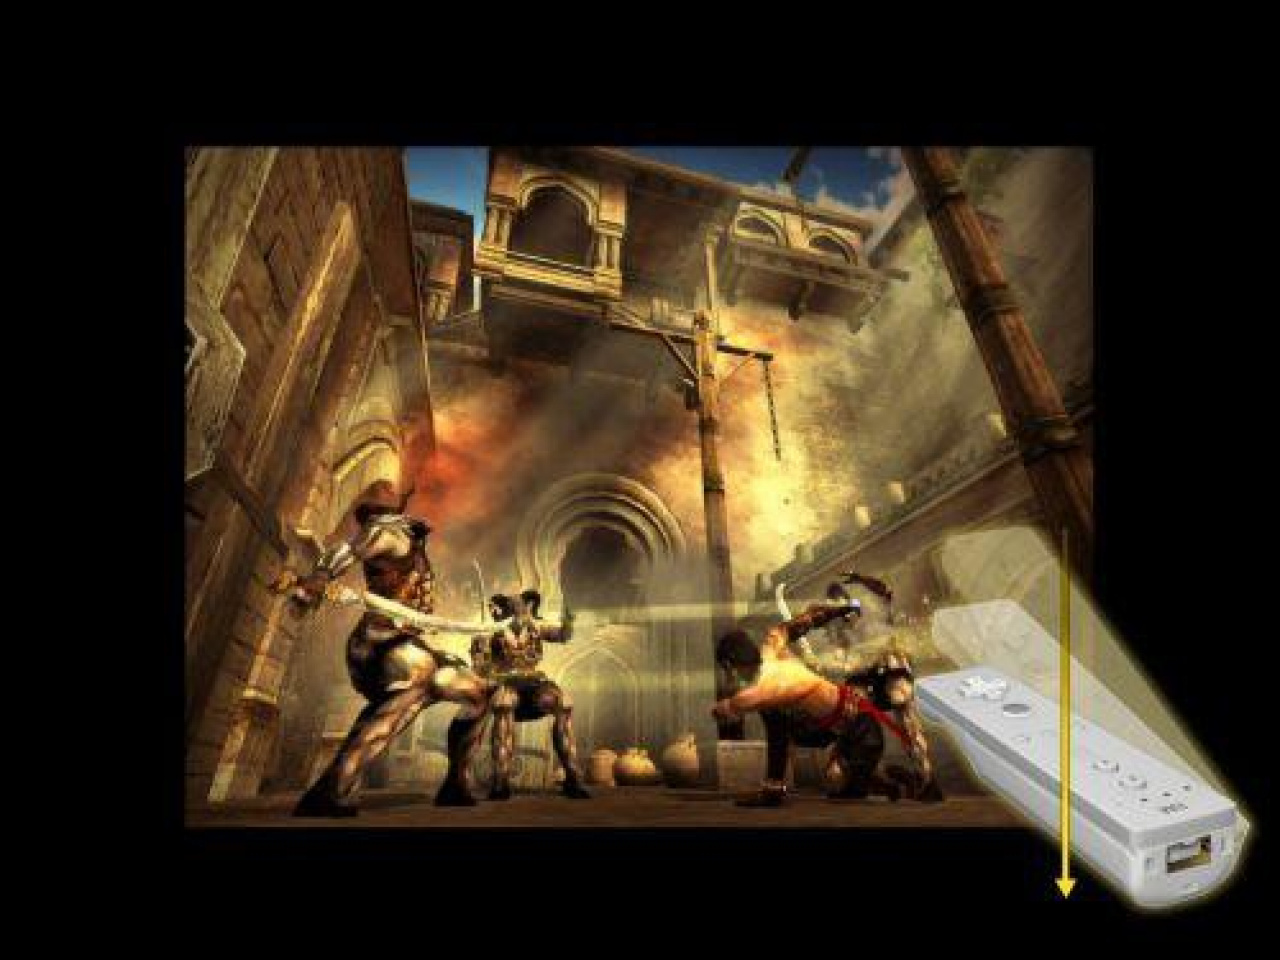 Prince Of Persia: Rival Swords (PSP) : : PC & Video Games